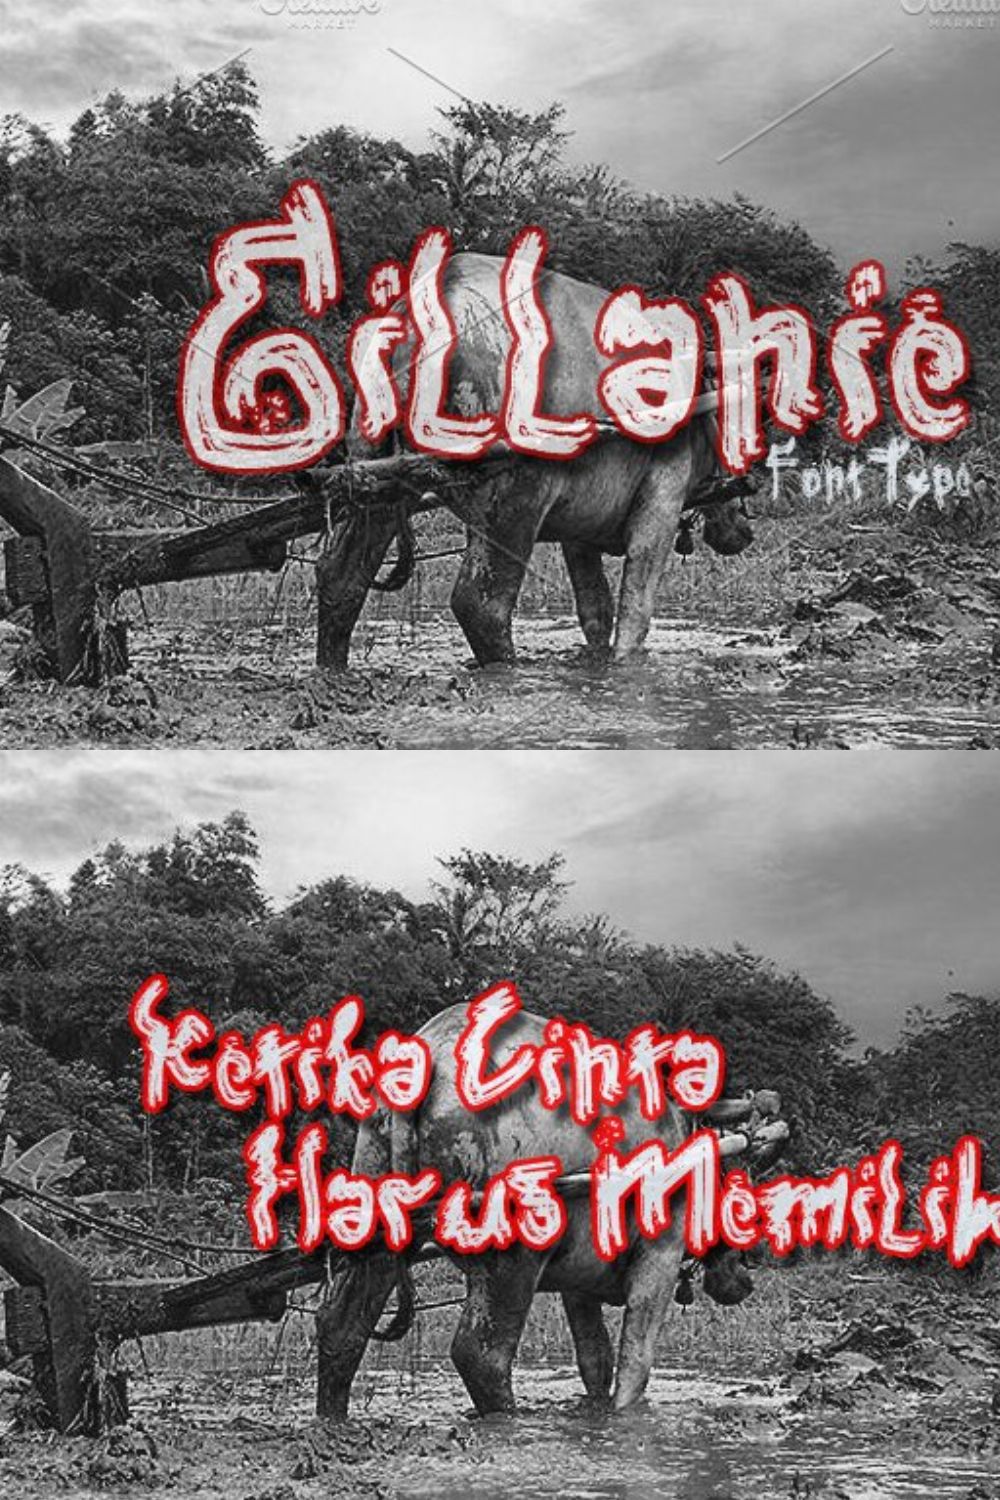 Gillanie pinterest preview image.